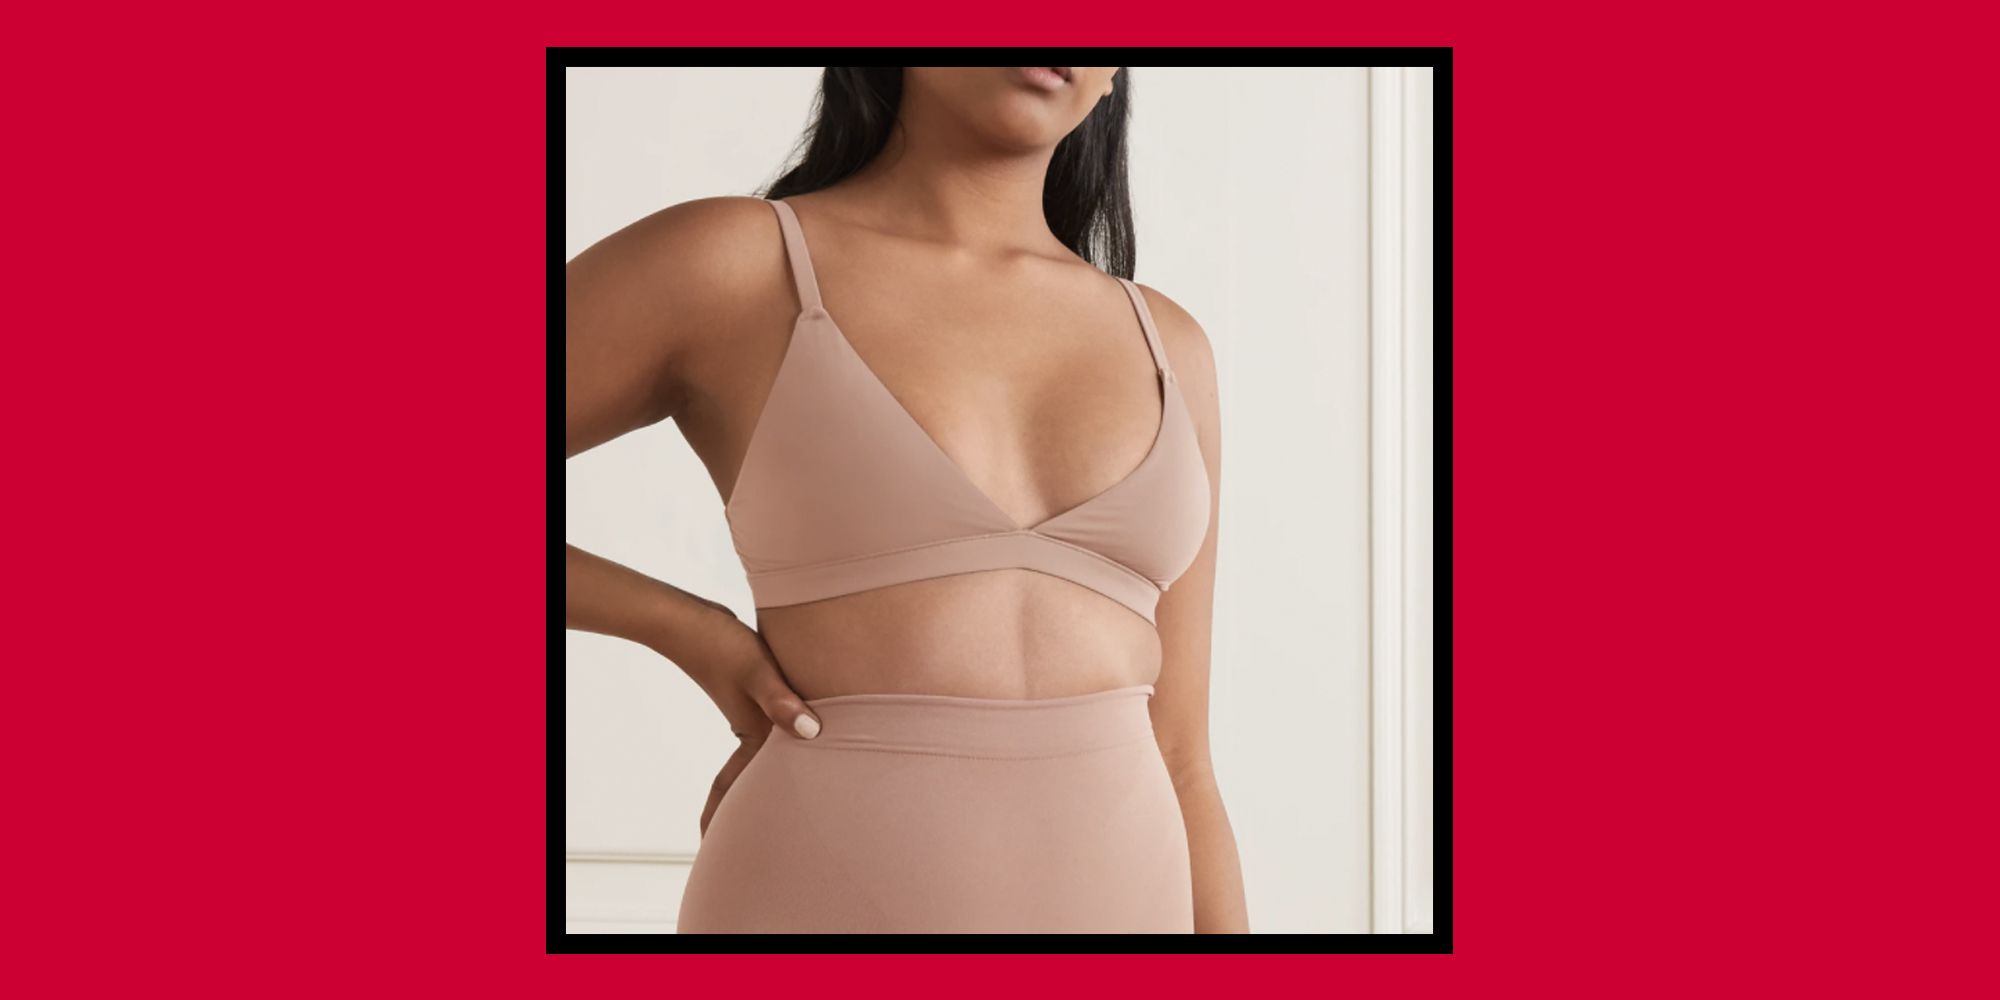 Shop new arrivals from Spanx and Skims including shapewear, bras, clothing  and more - Good Morning America